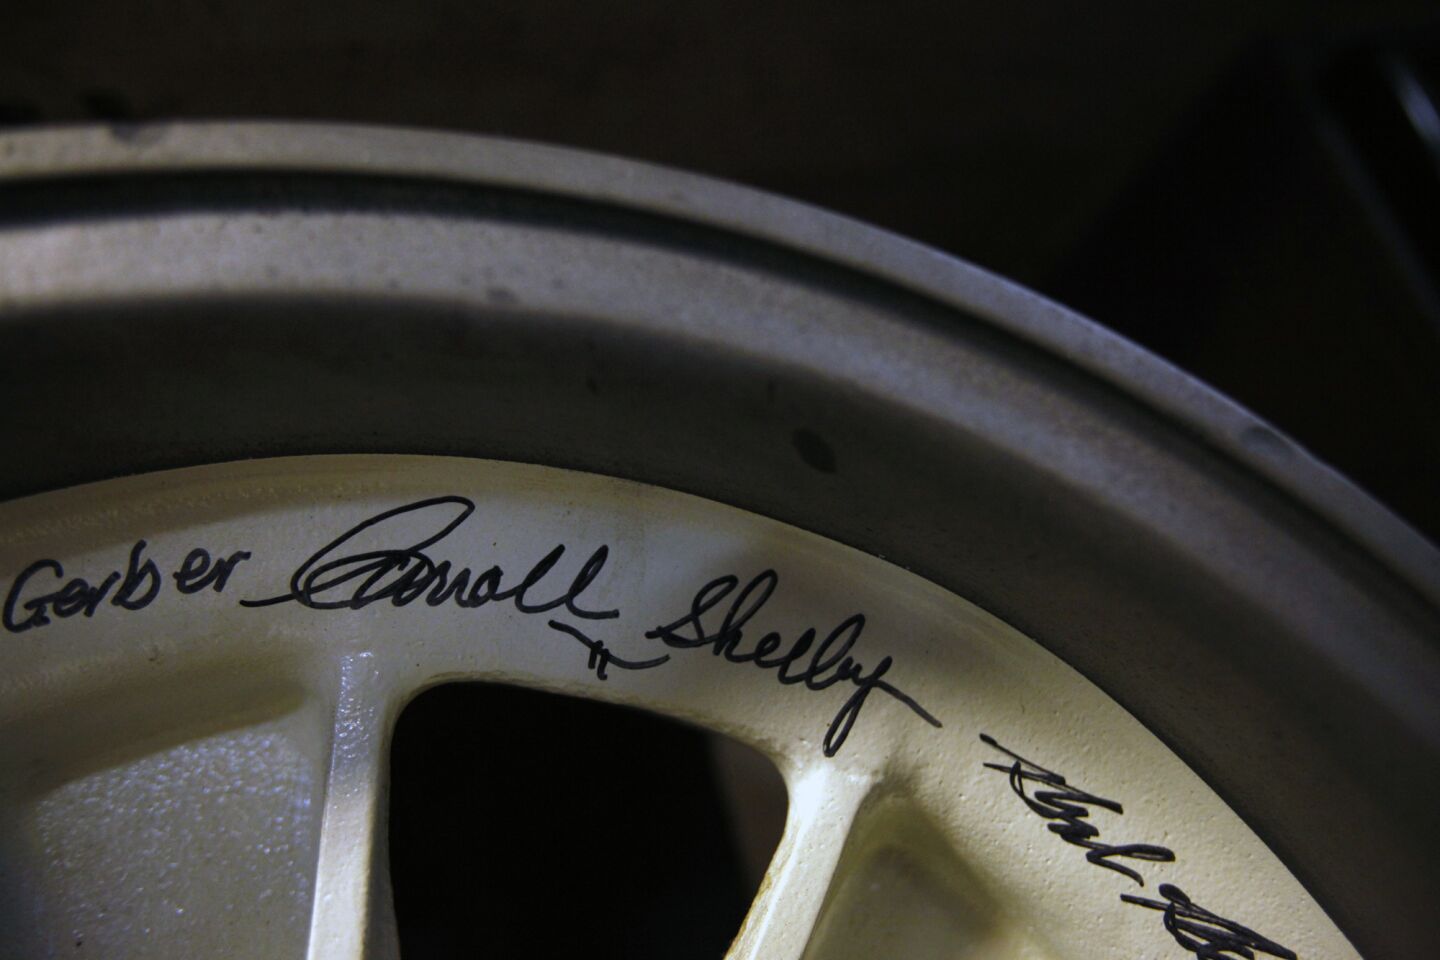 A racing rim signed by Carroll Shelby, the father of the Cobra, in Lynn Park's garage.